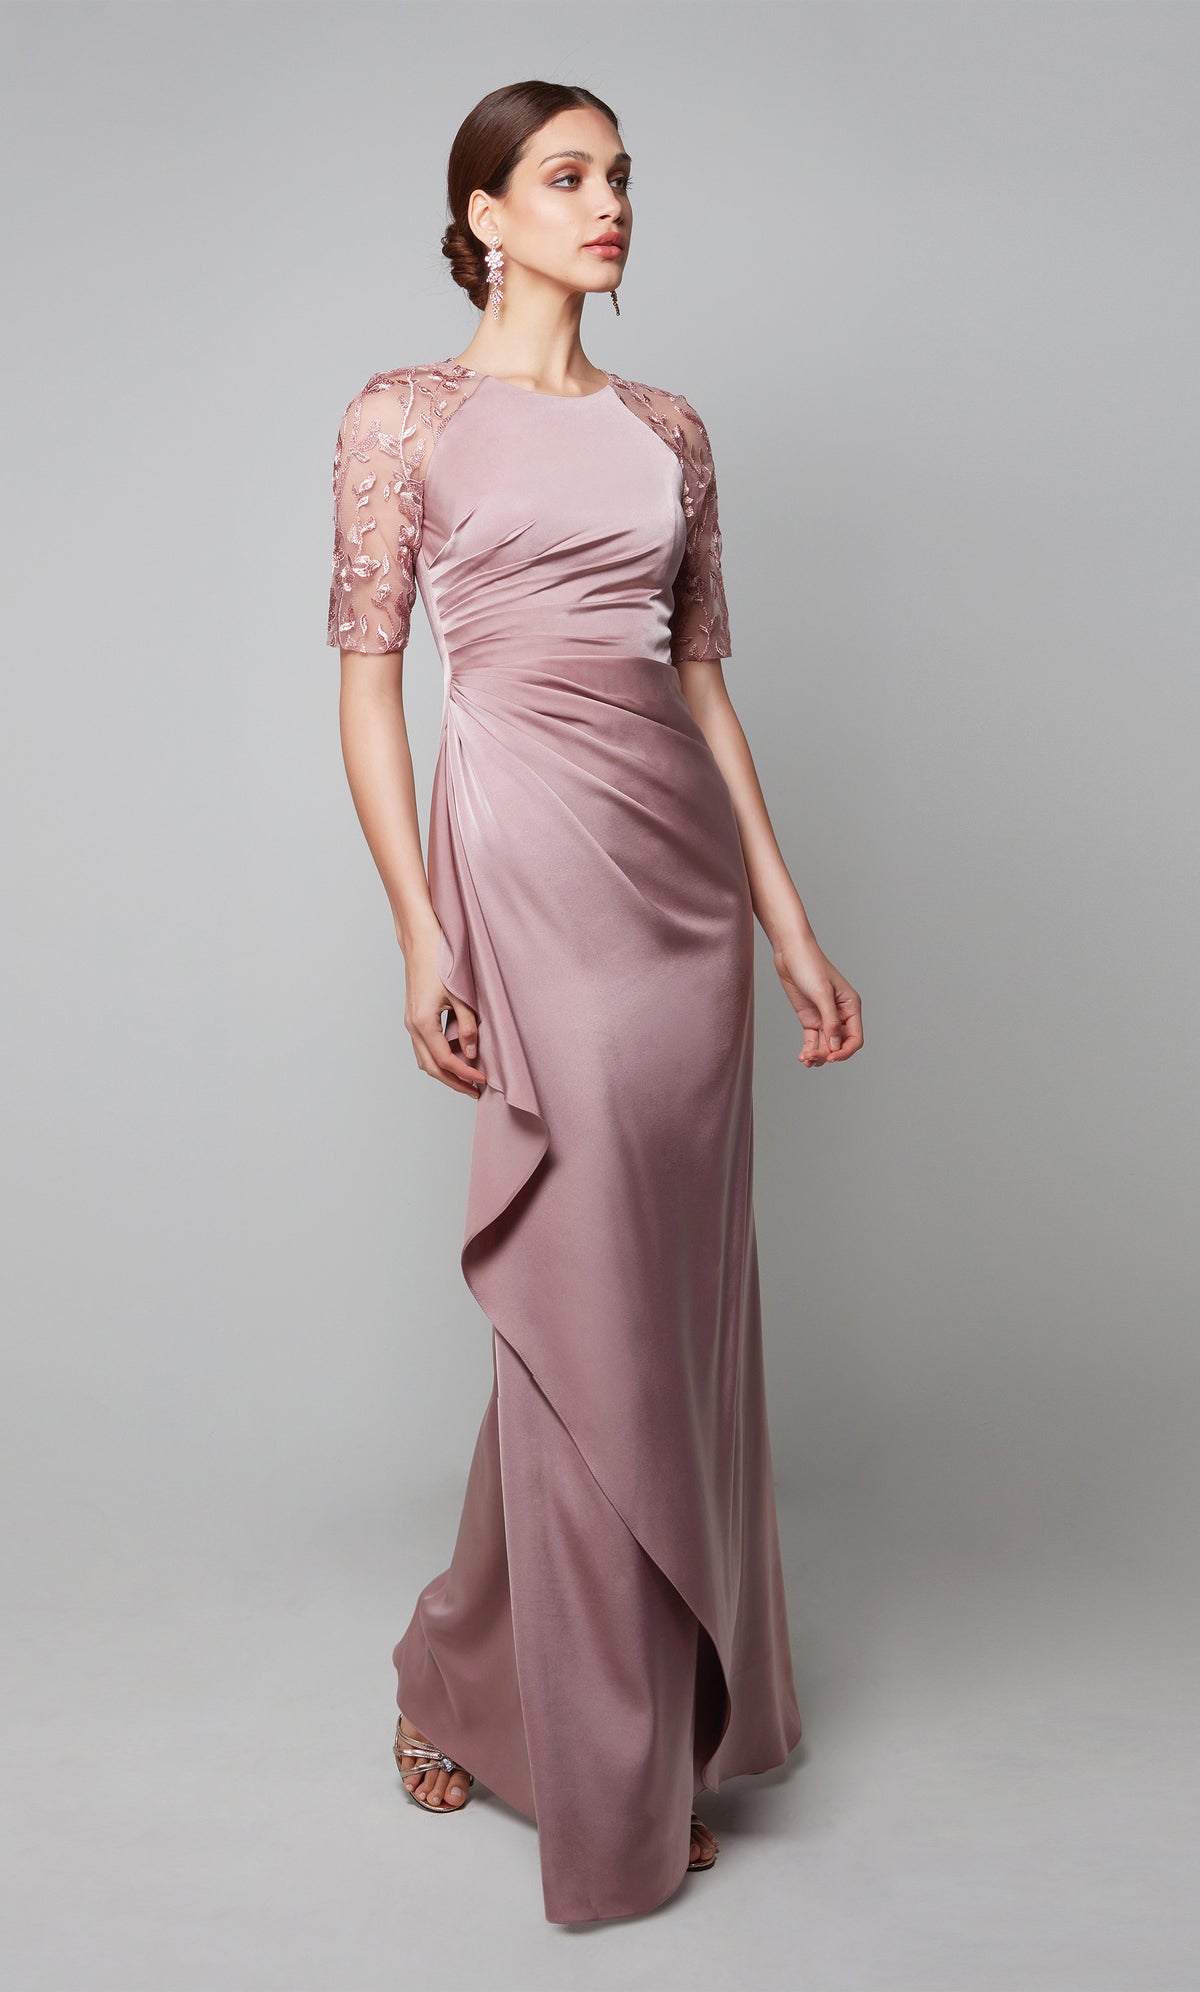 Ruched ruffle dress with a high neck and sheer lace sleeves in light pink. Color-SWATCH_27601__HEATHER